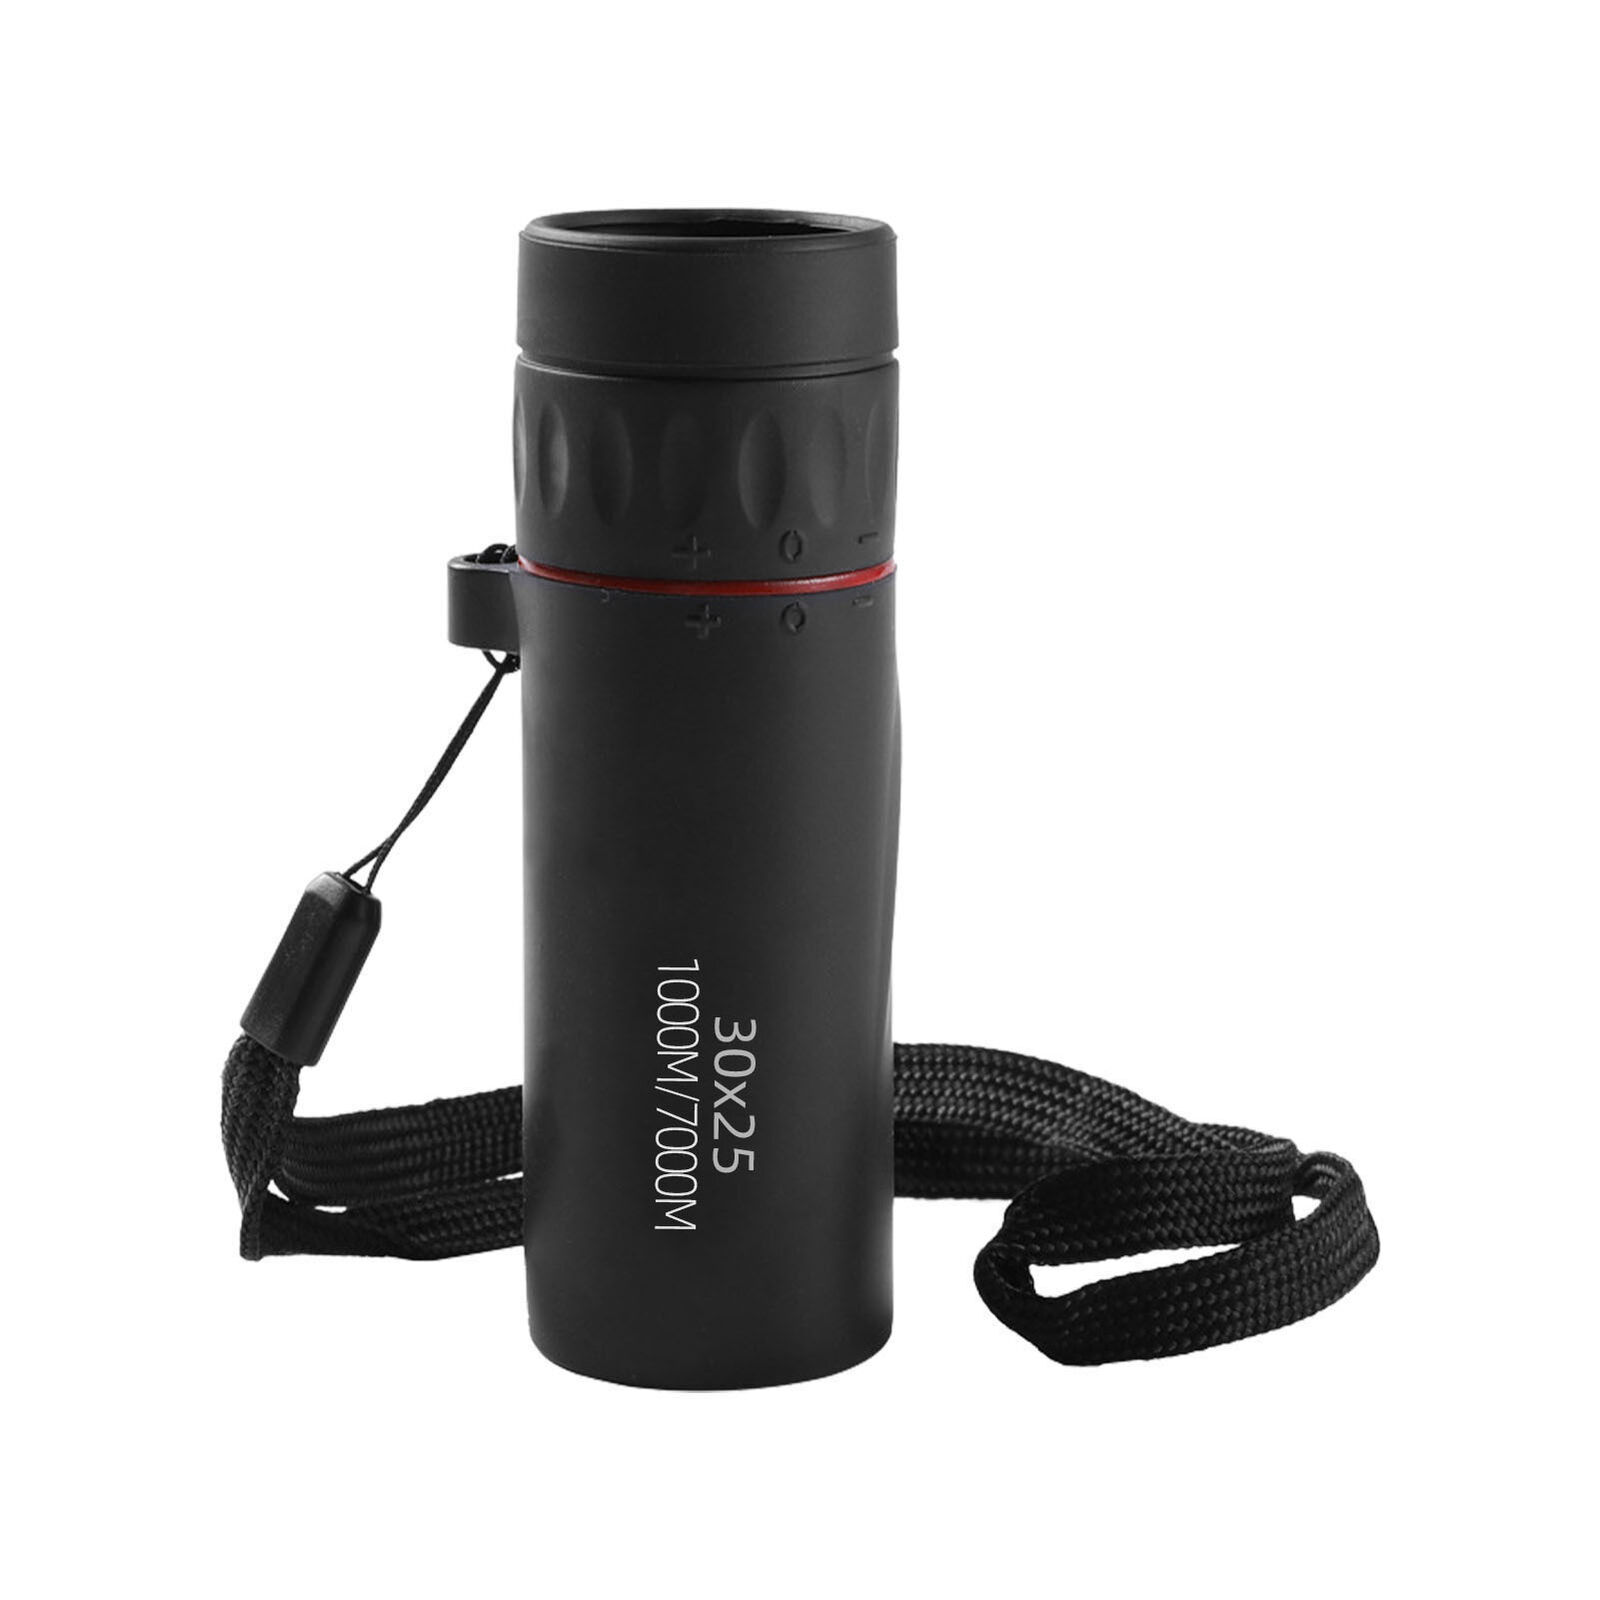 Outdoor Camping Portable Travel Mountaineering 30*25 Monoculars